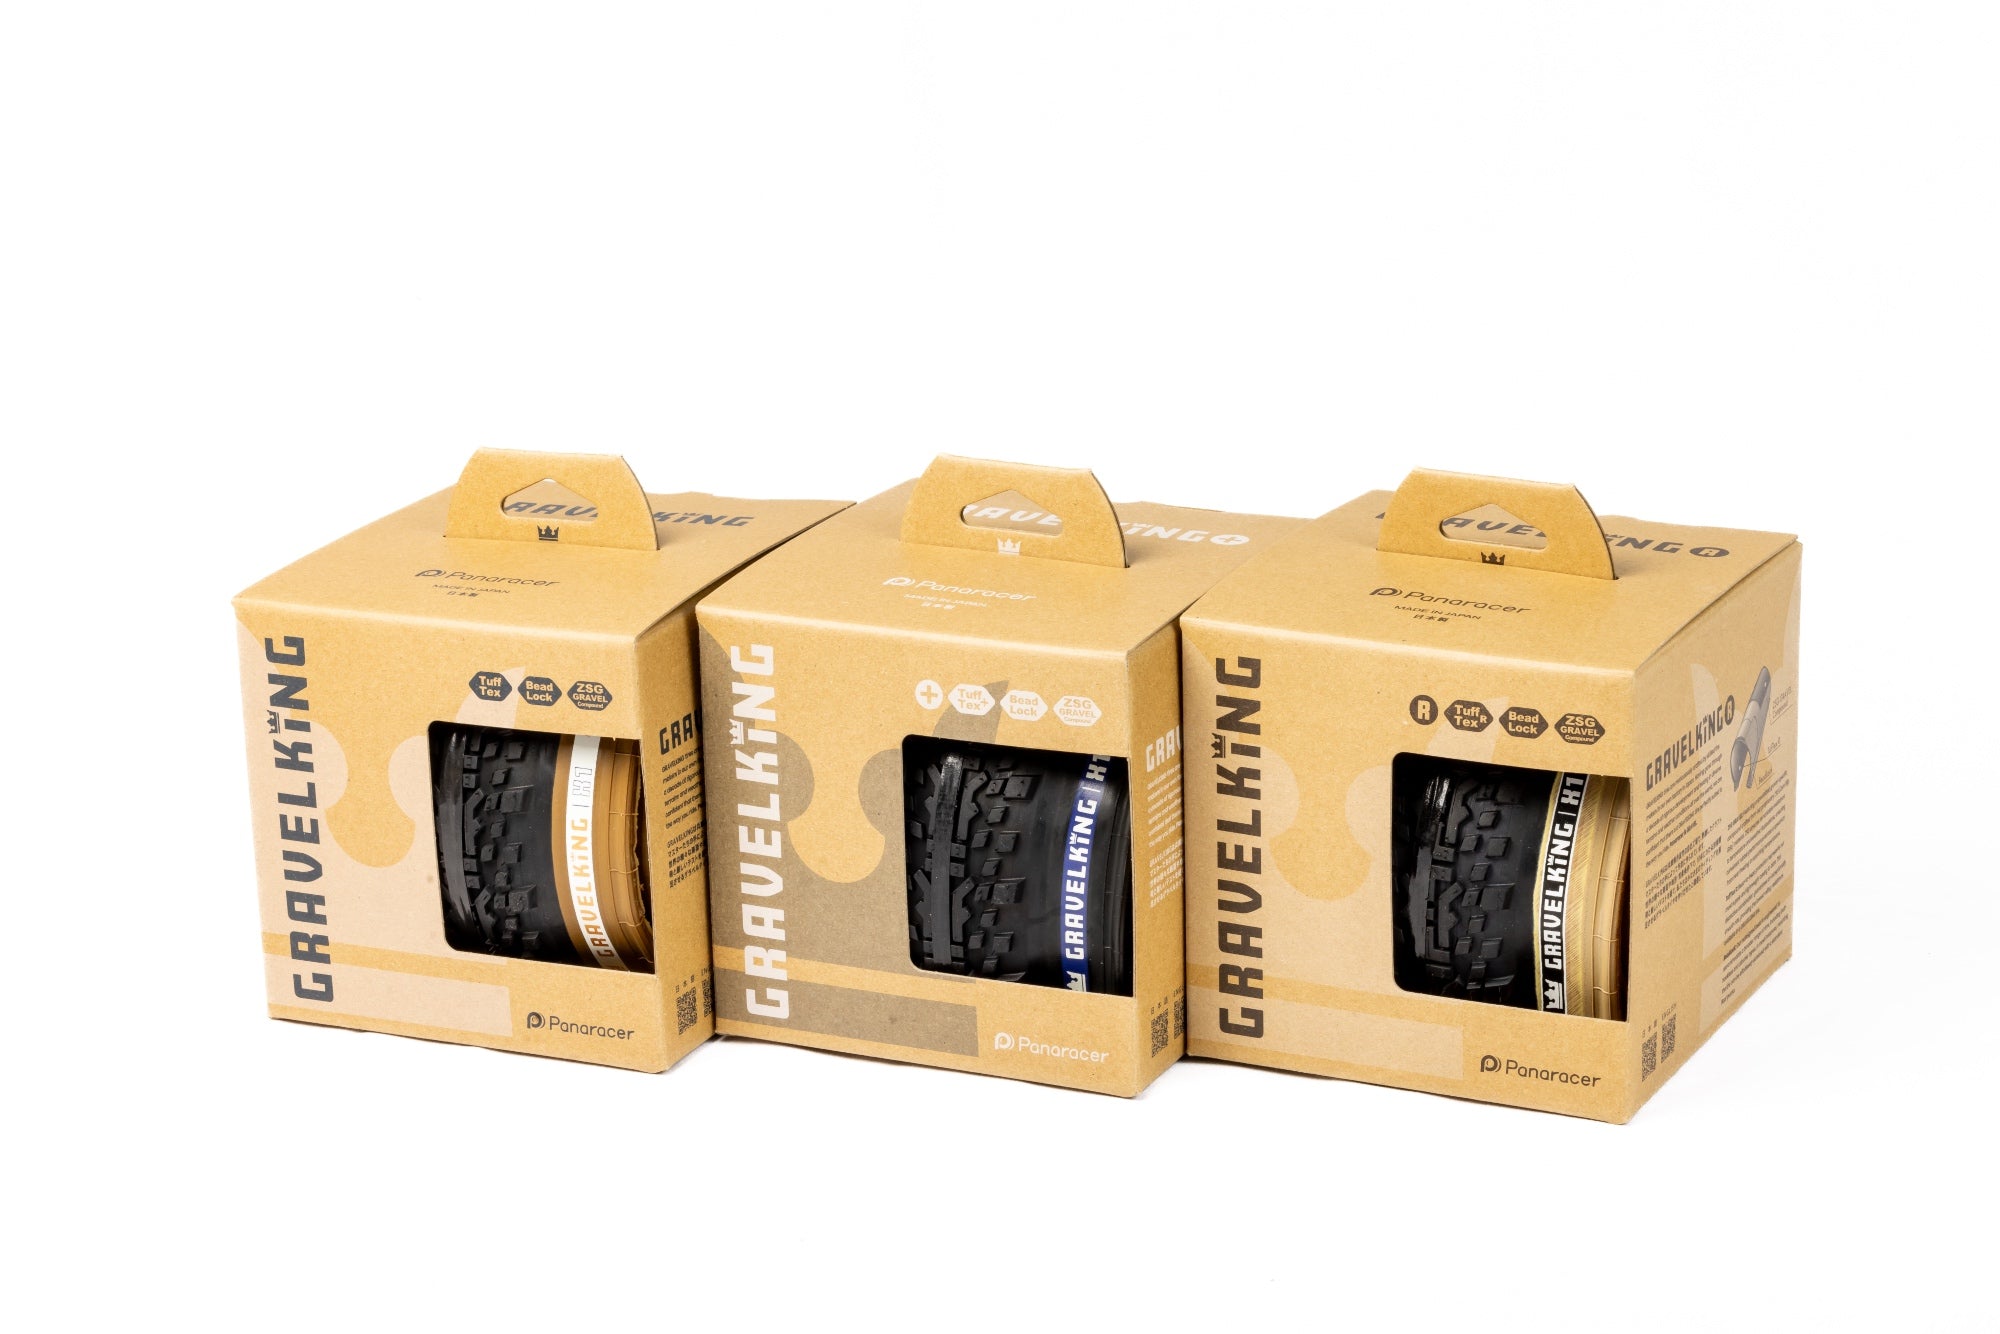 Three Panaracer GravelKing tyres in their boxes